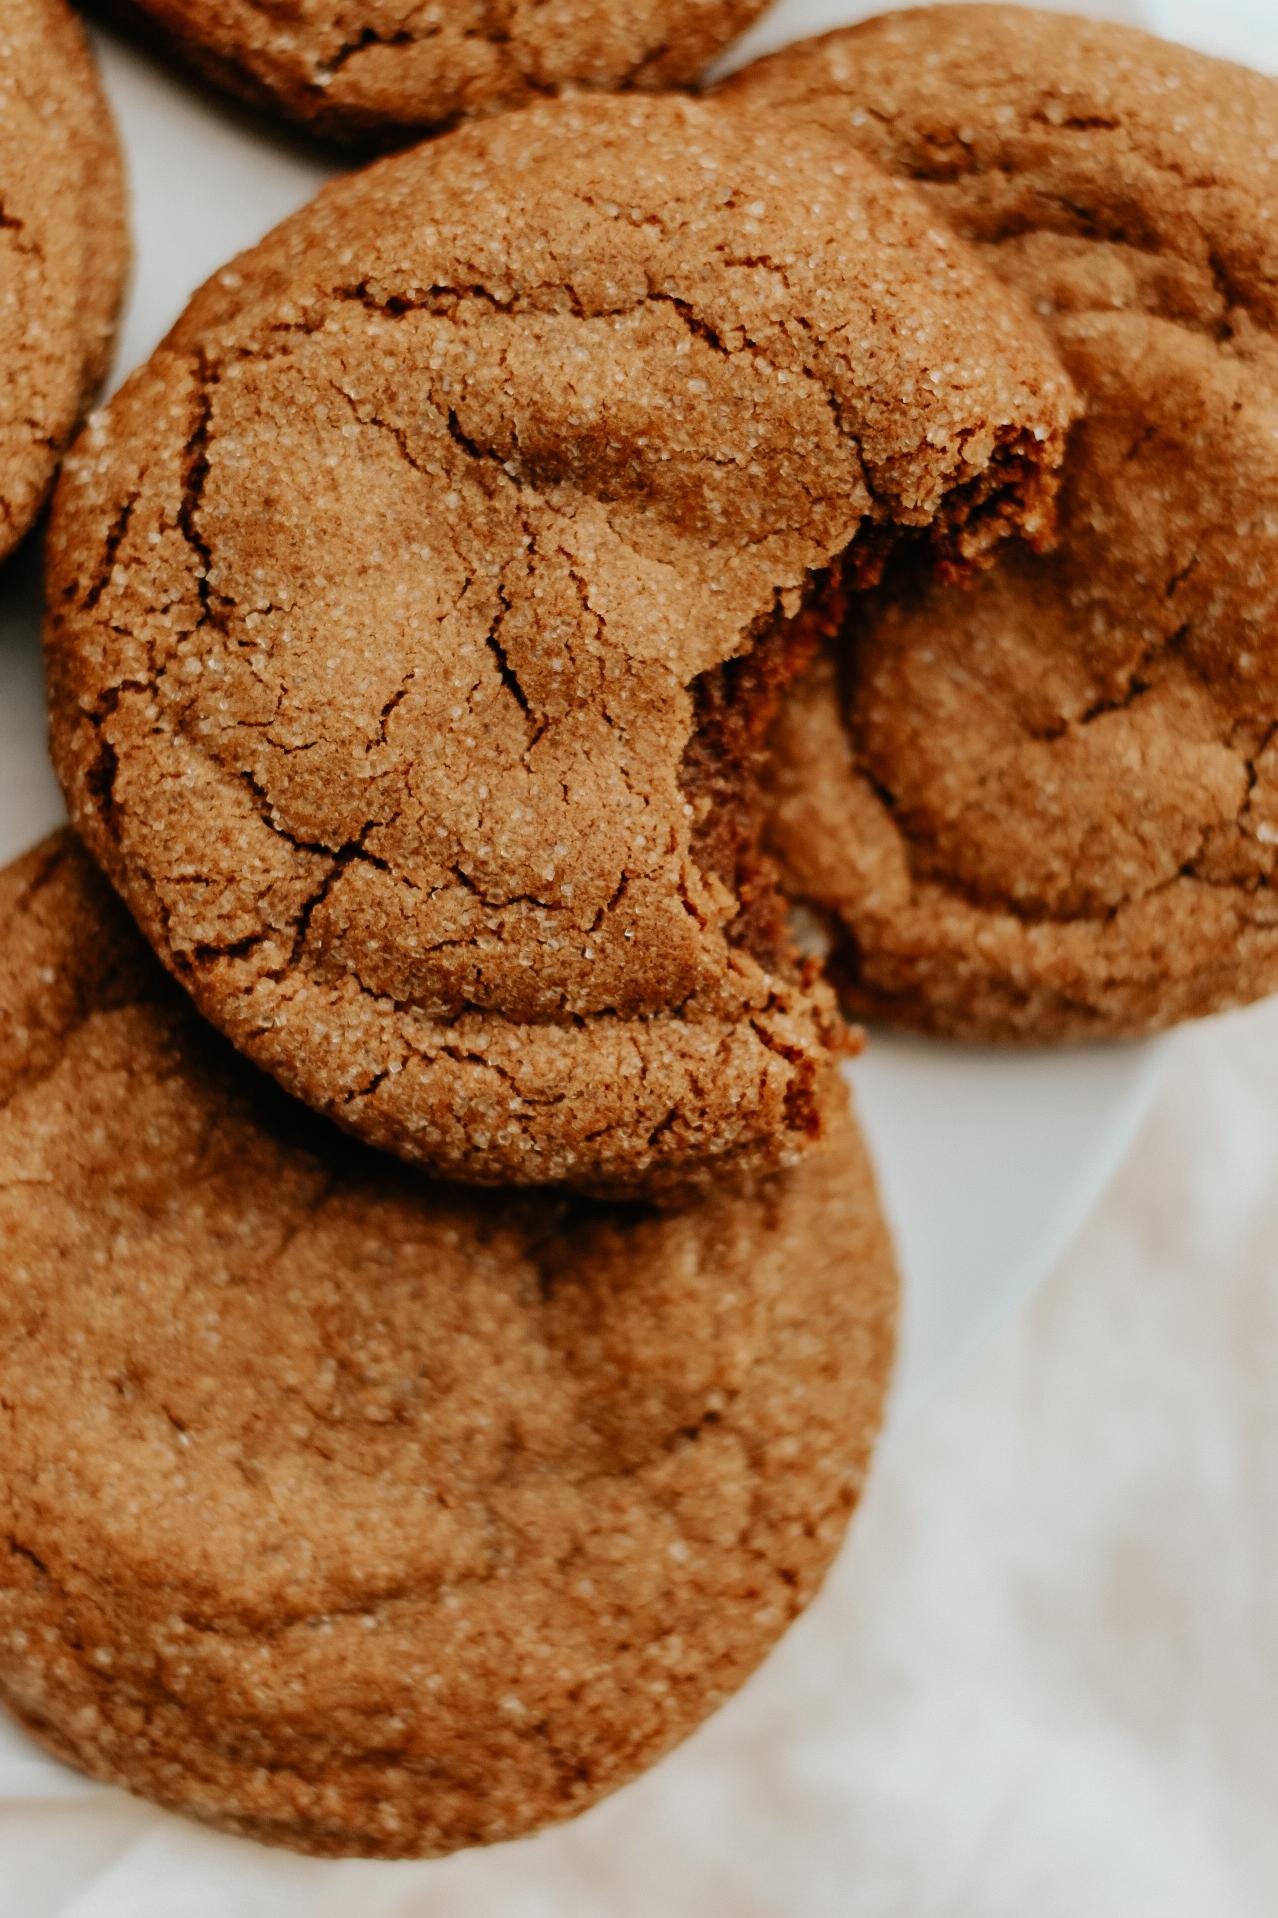  These golden-brown gingersnaps are gluten-free and packed with flavor.